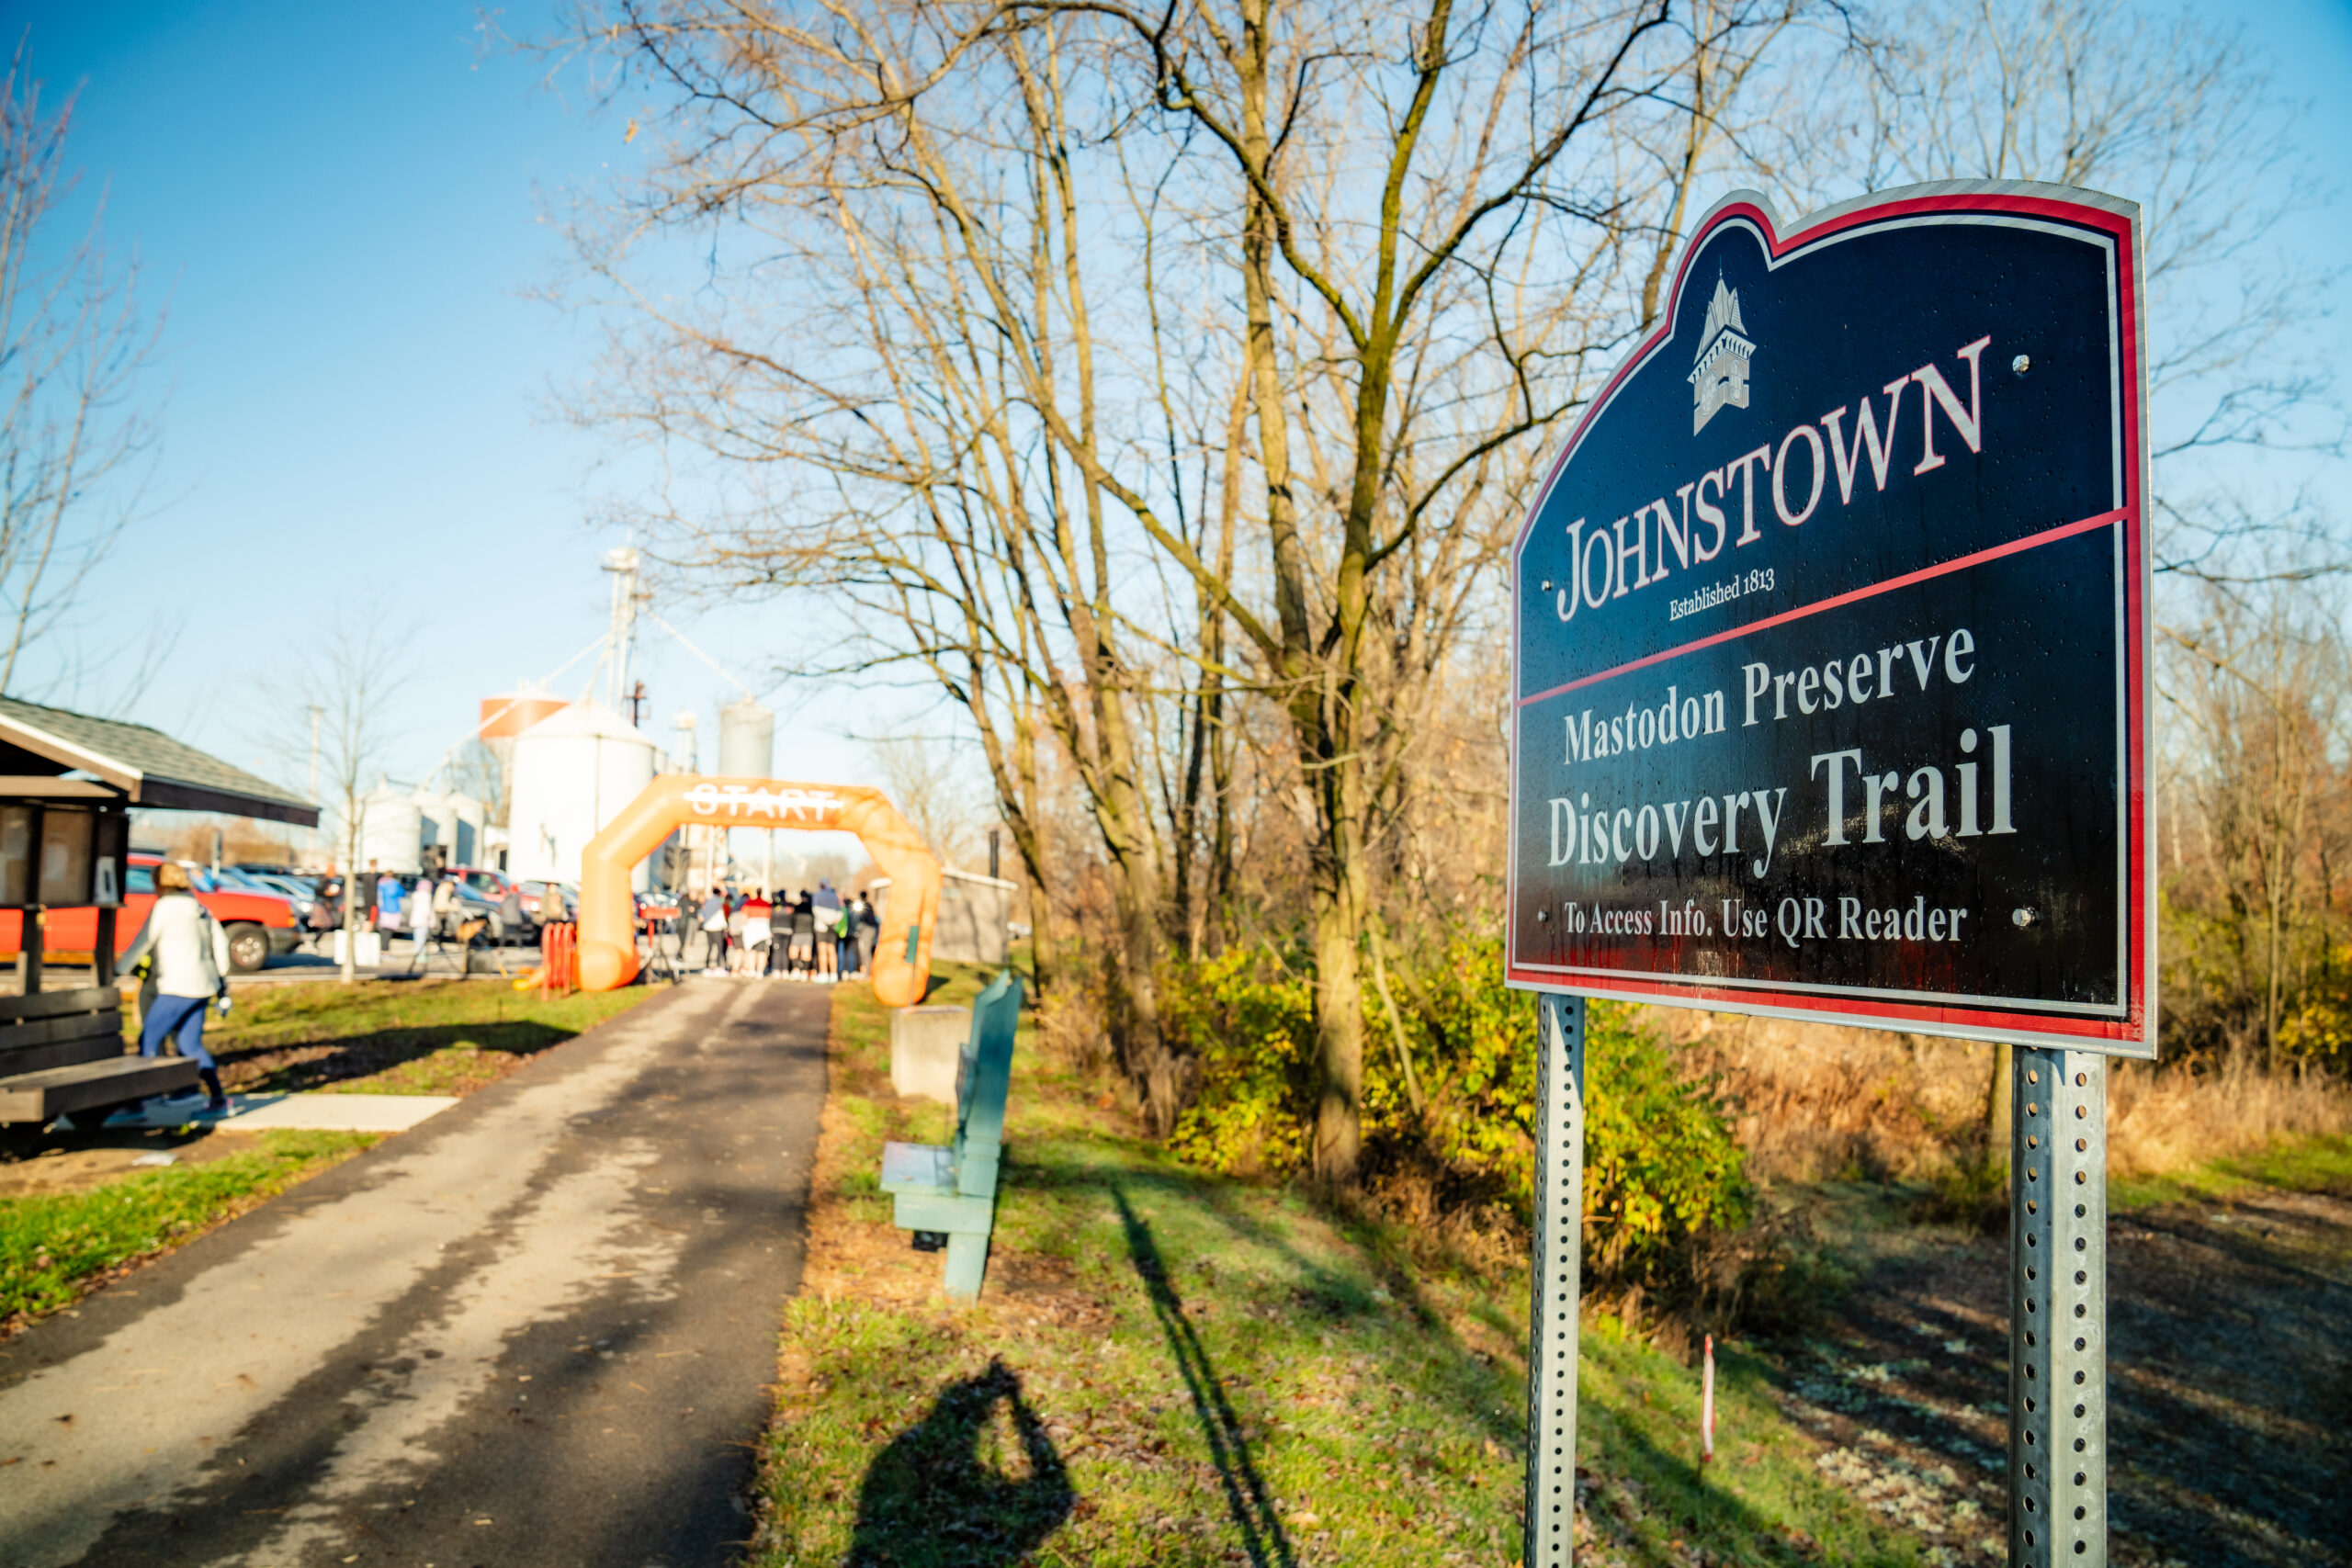 Johnstown Mastodon Preserve Discovery Trail - Johnstown, Alexandria and Granville Turkey Trot 5k, 10k, Half Marathon & Kids Fun Run - USA Race Timing and Event Management - Best Race Swag In Ohio - Granville Turkey Trot - Intel Johnstown